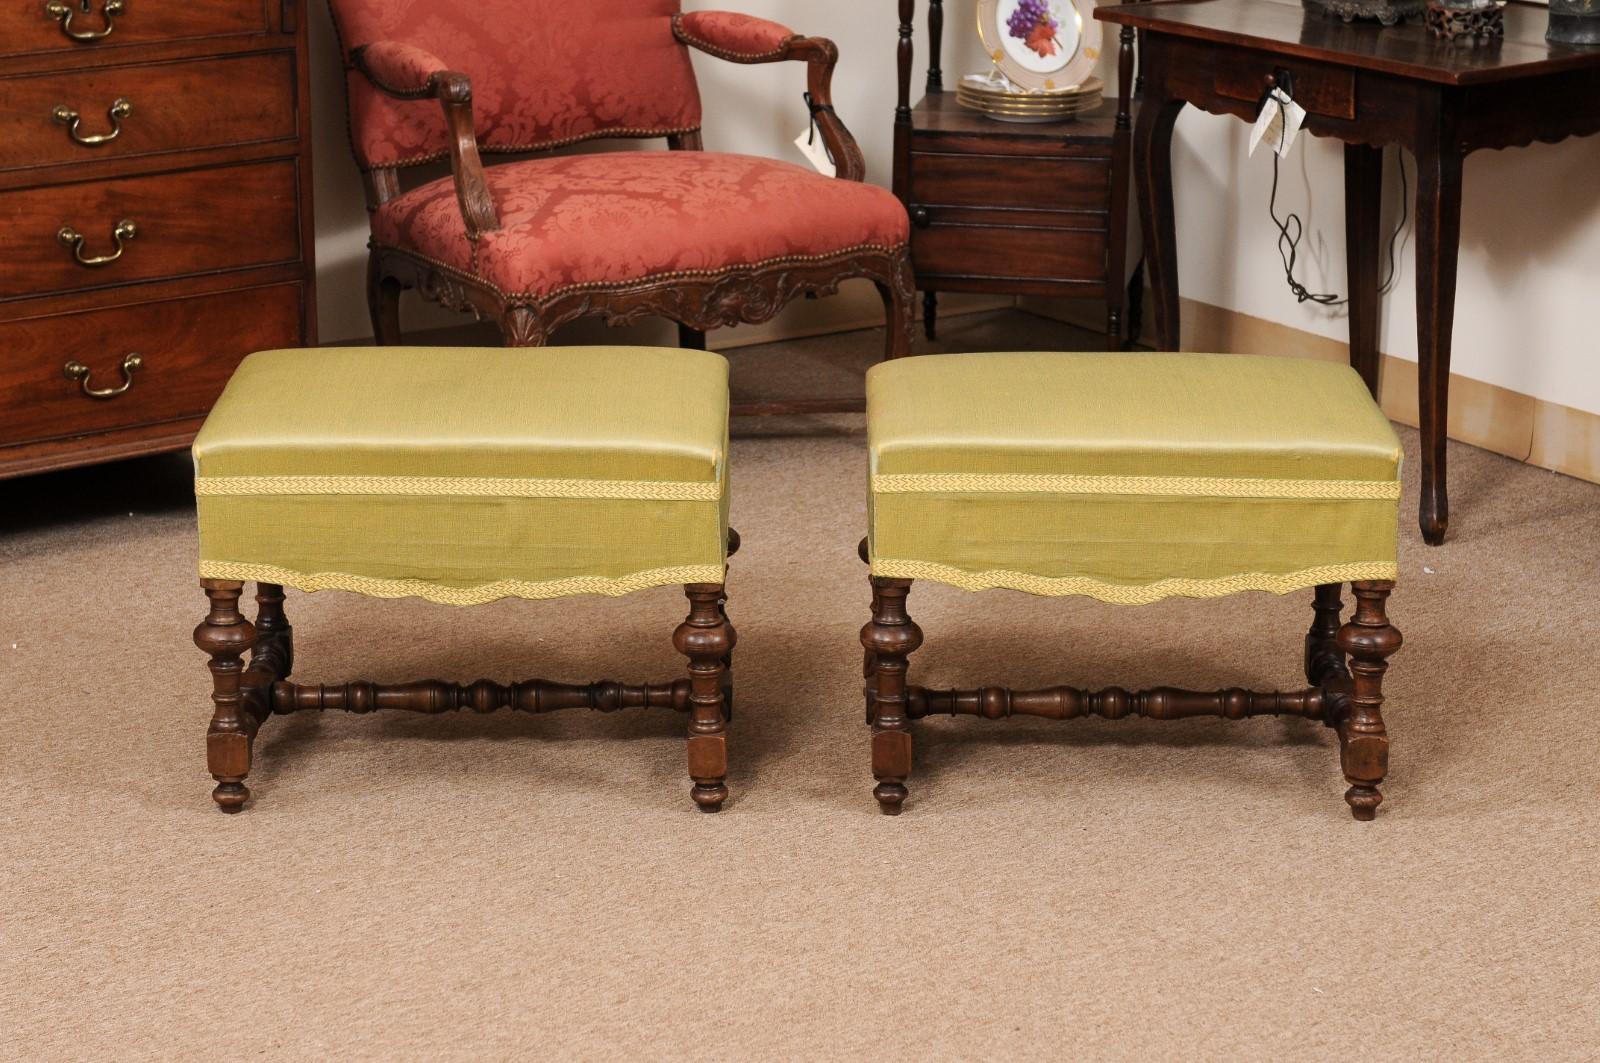 Pair of 18th Century Italian Tuscan Walnut Benches with Turned Legs and Stretchers